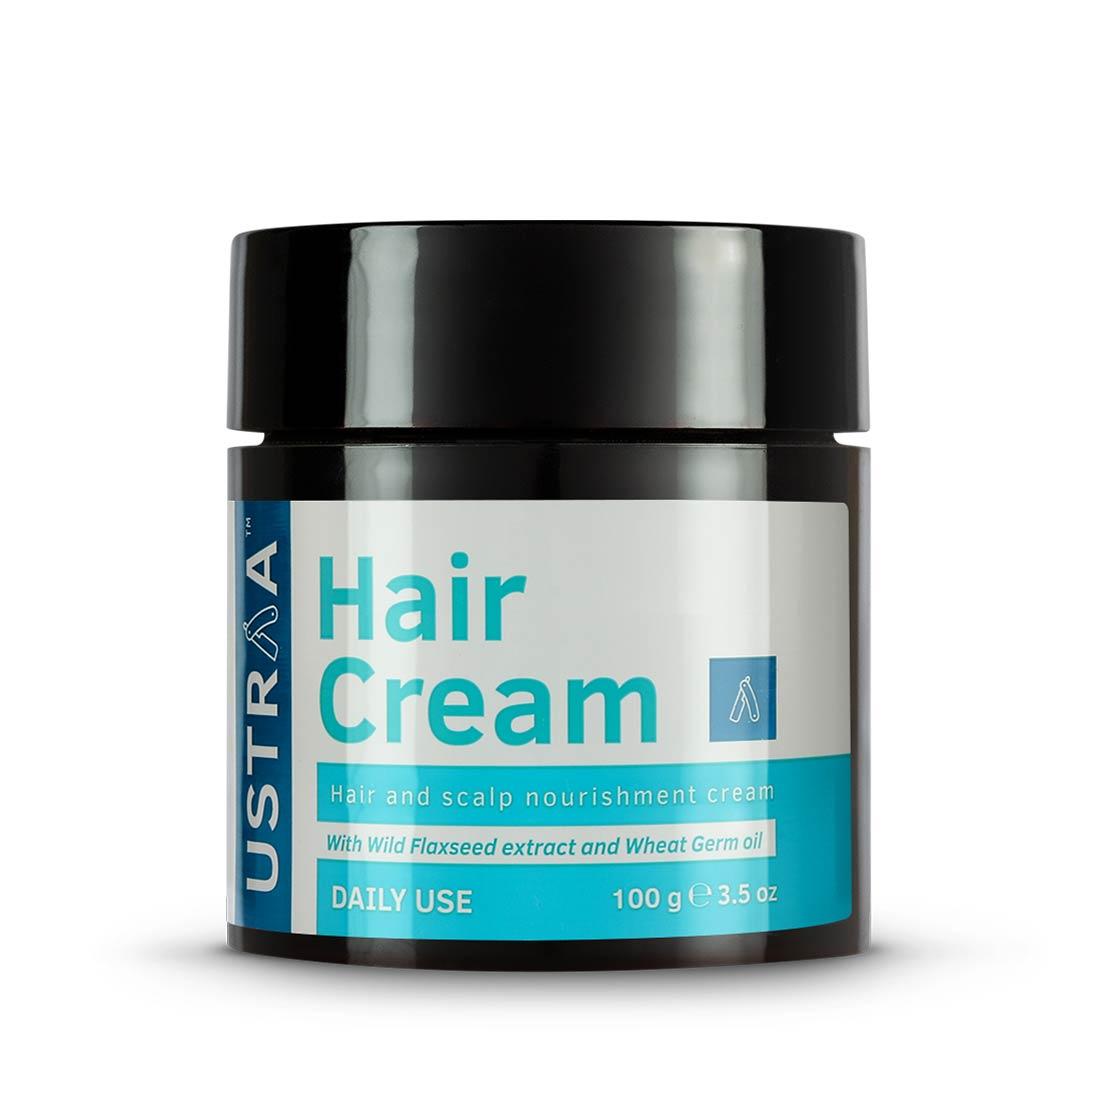 What is the Best Hair Cream for men? - Mankind